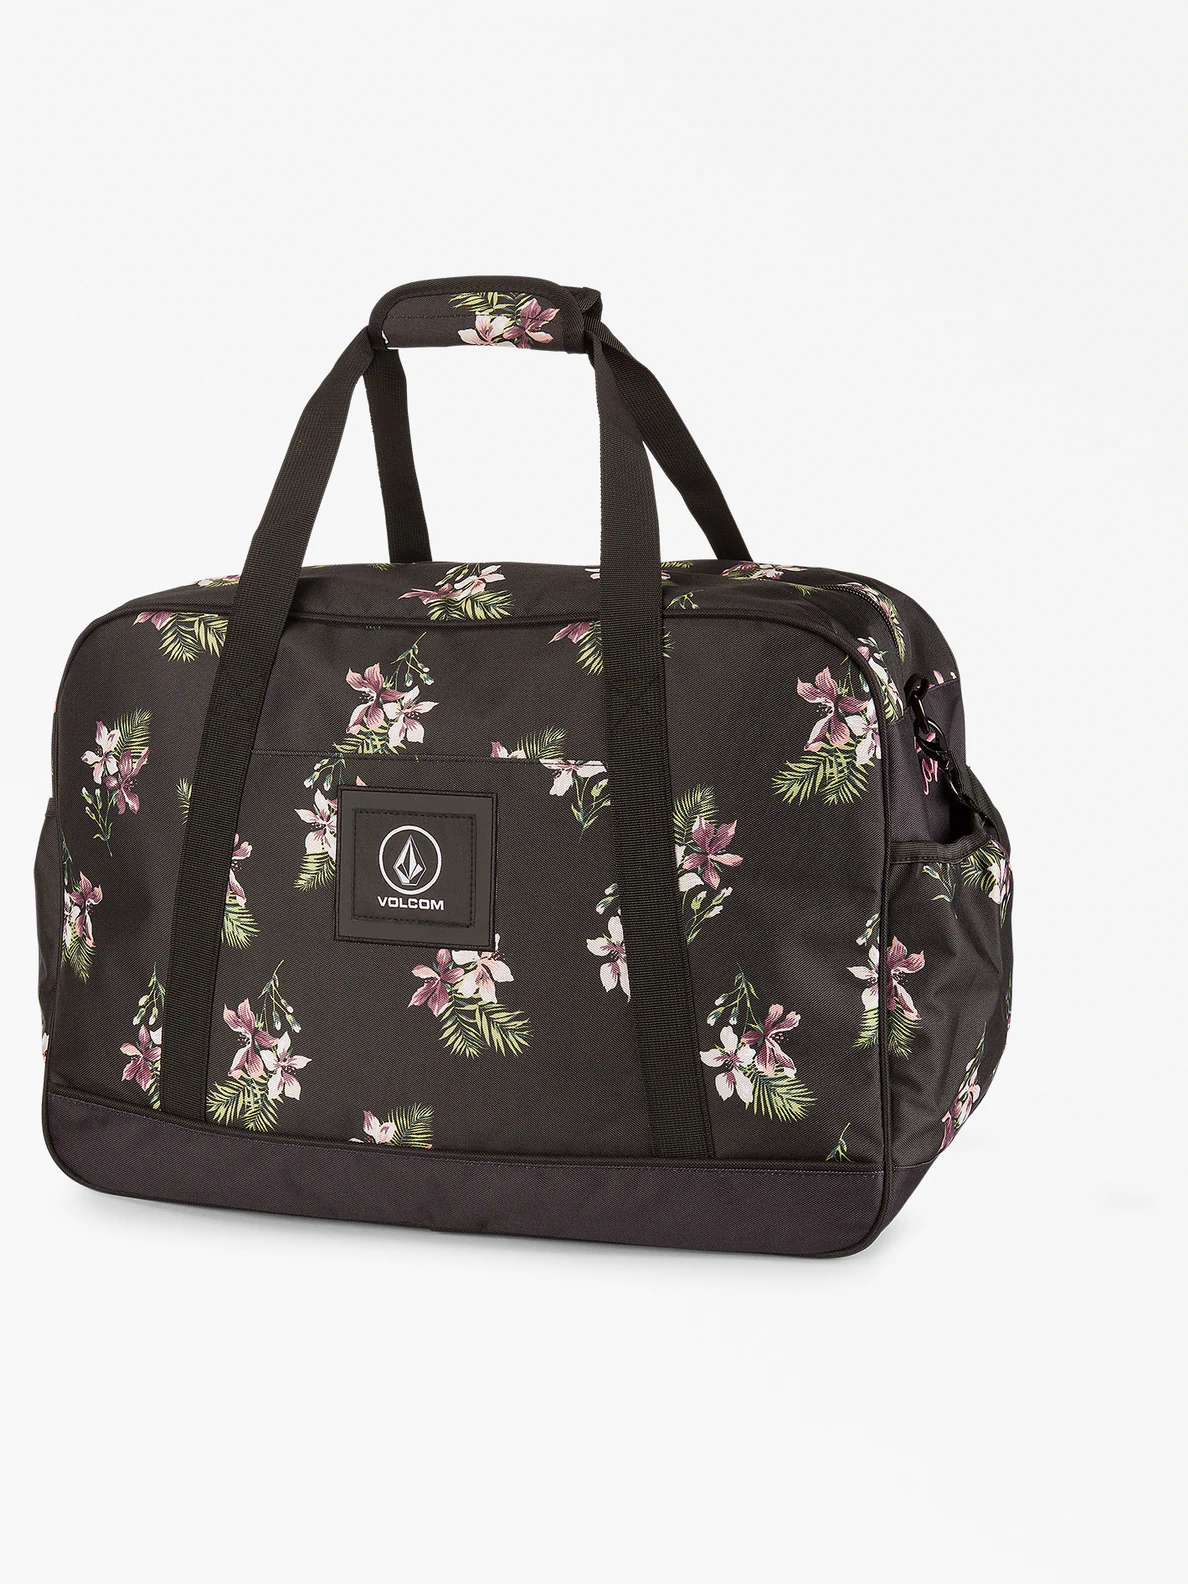 PATCH ATTACK GEARBAG - BLACK FLORAL PRINT